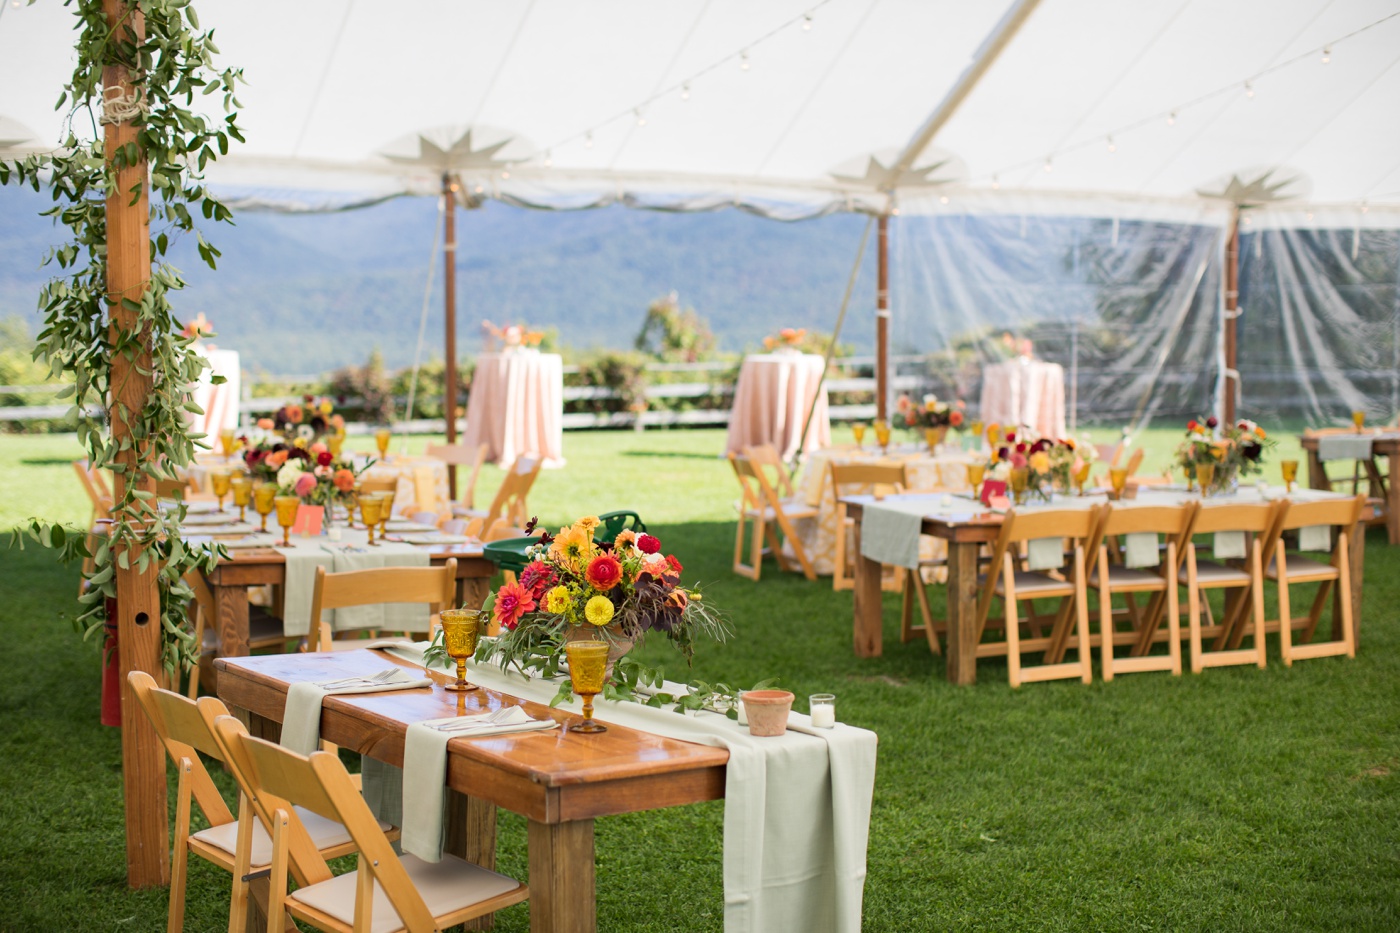 Sage linens, vintage amber goblets, and colorful floral centerpieces for a fall wedding reception